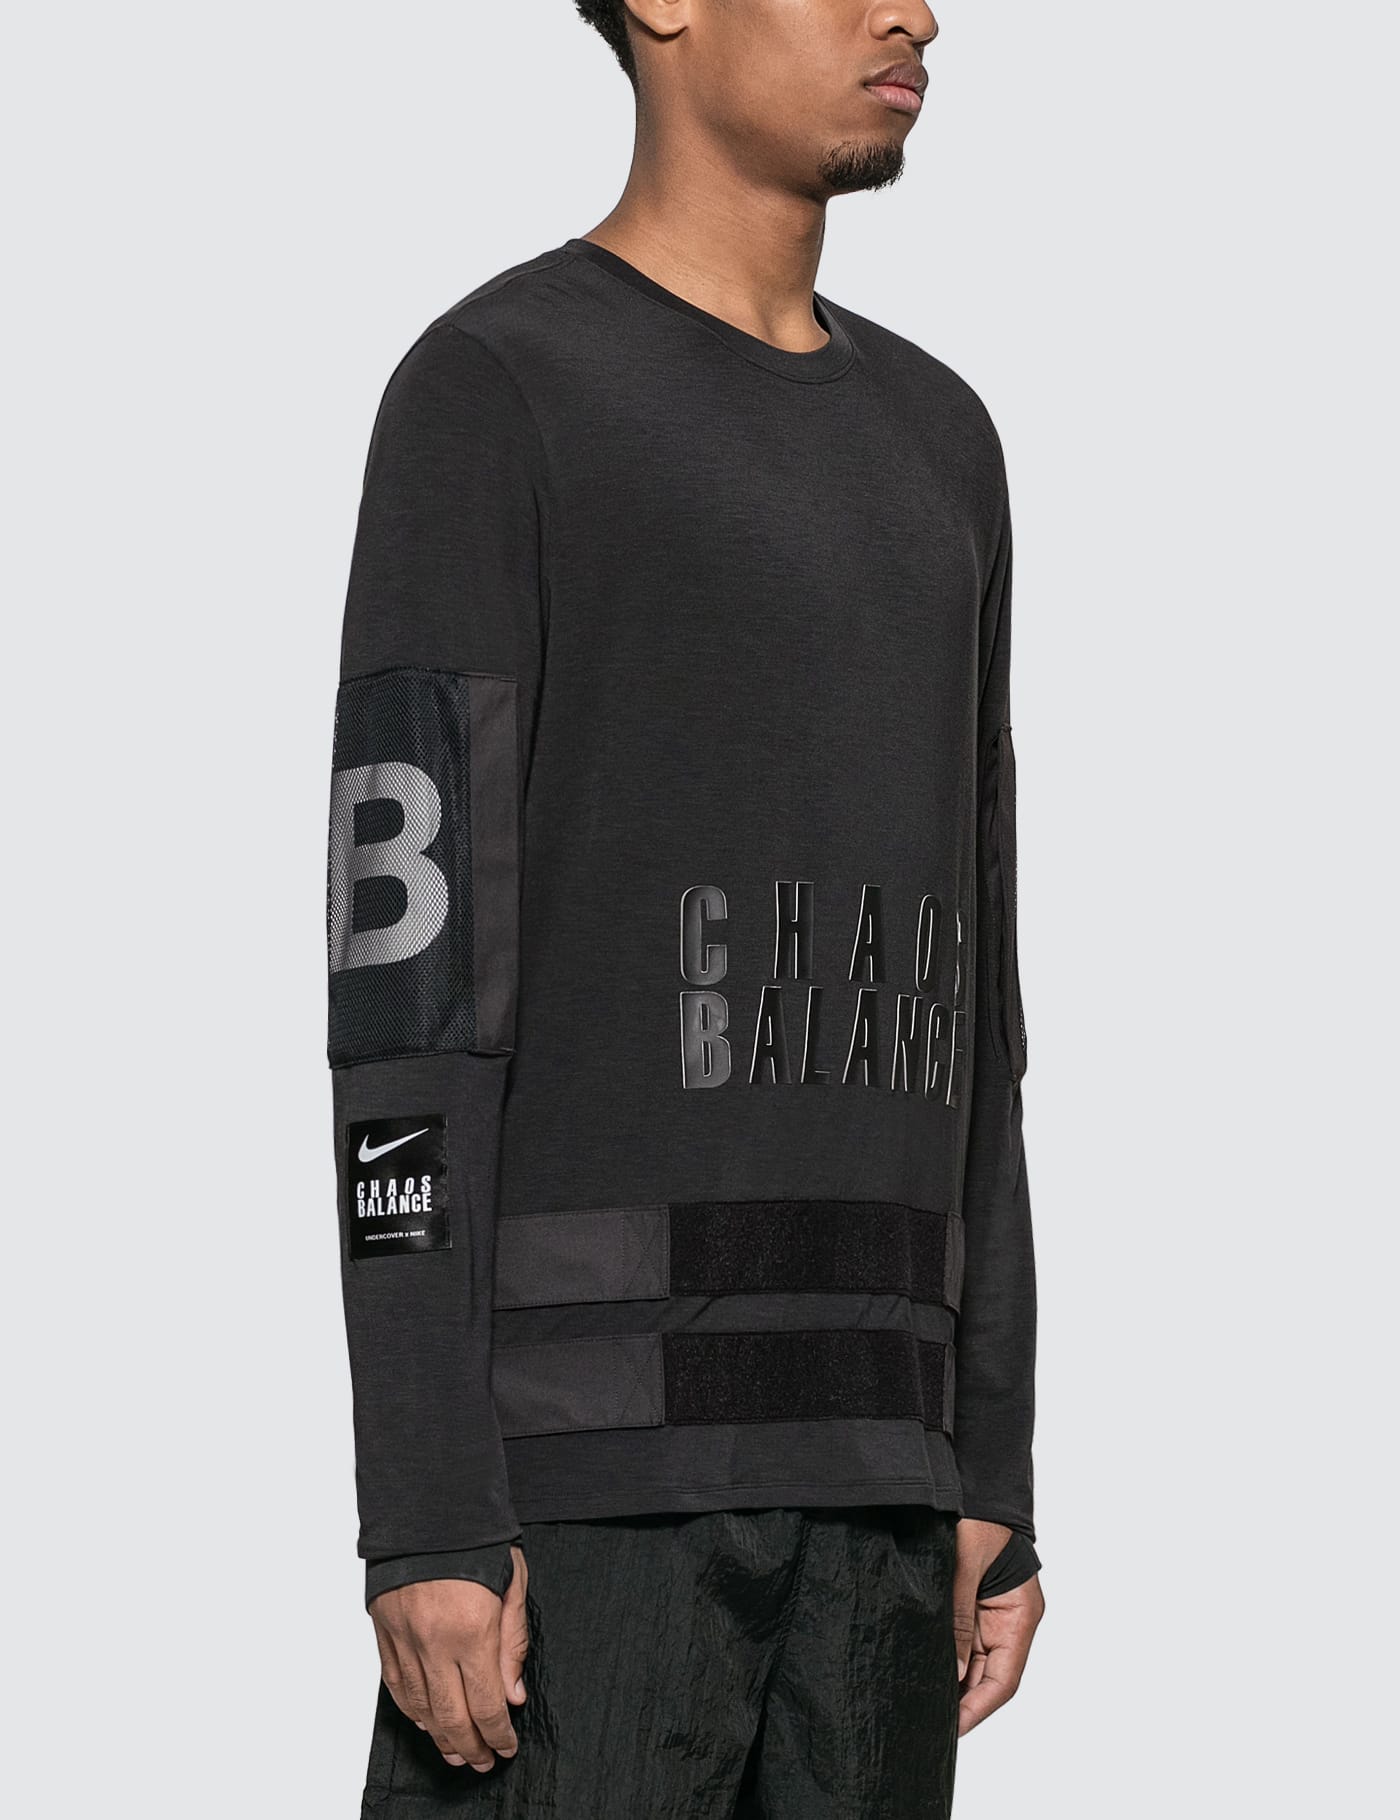 Nike - Nike x Undercover Long Sleeve Top | HBX - Globally Curated